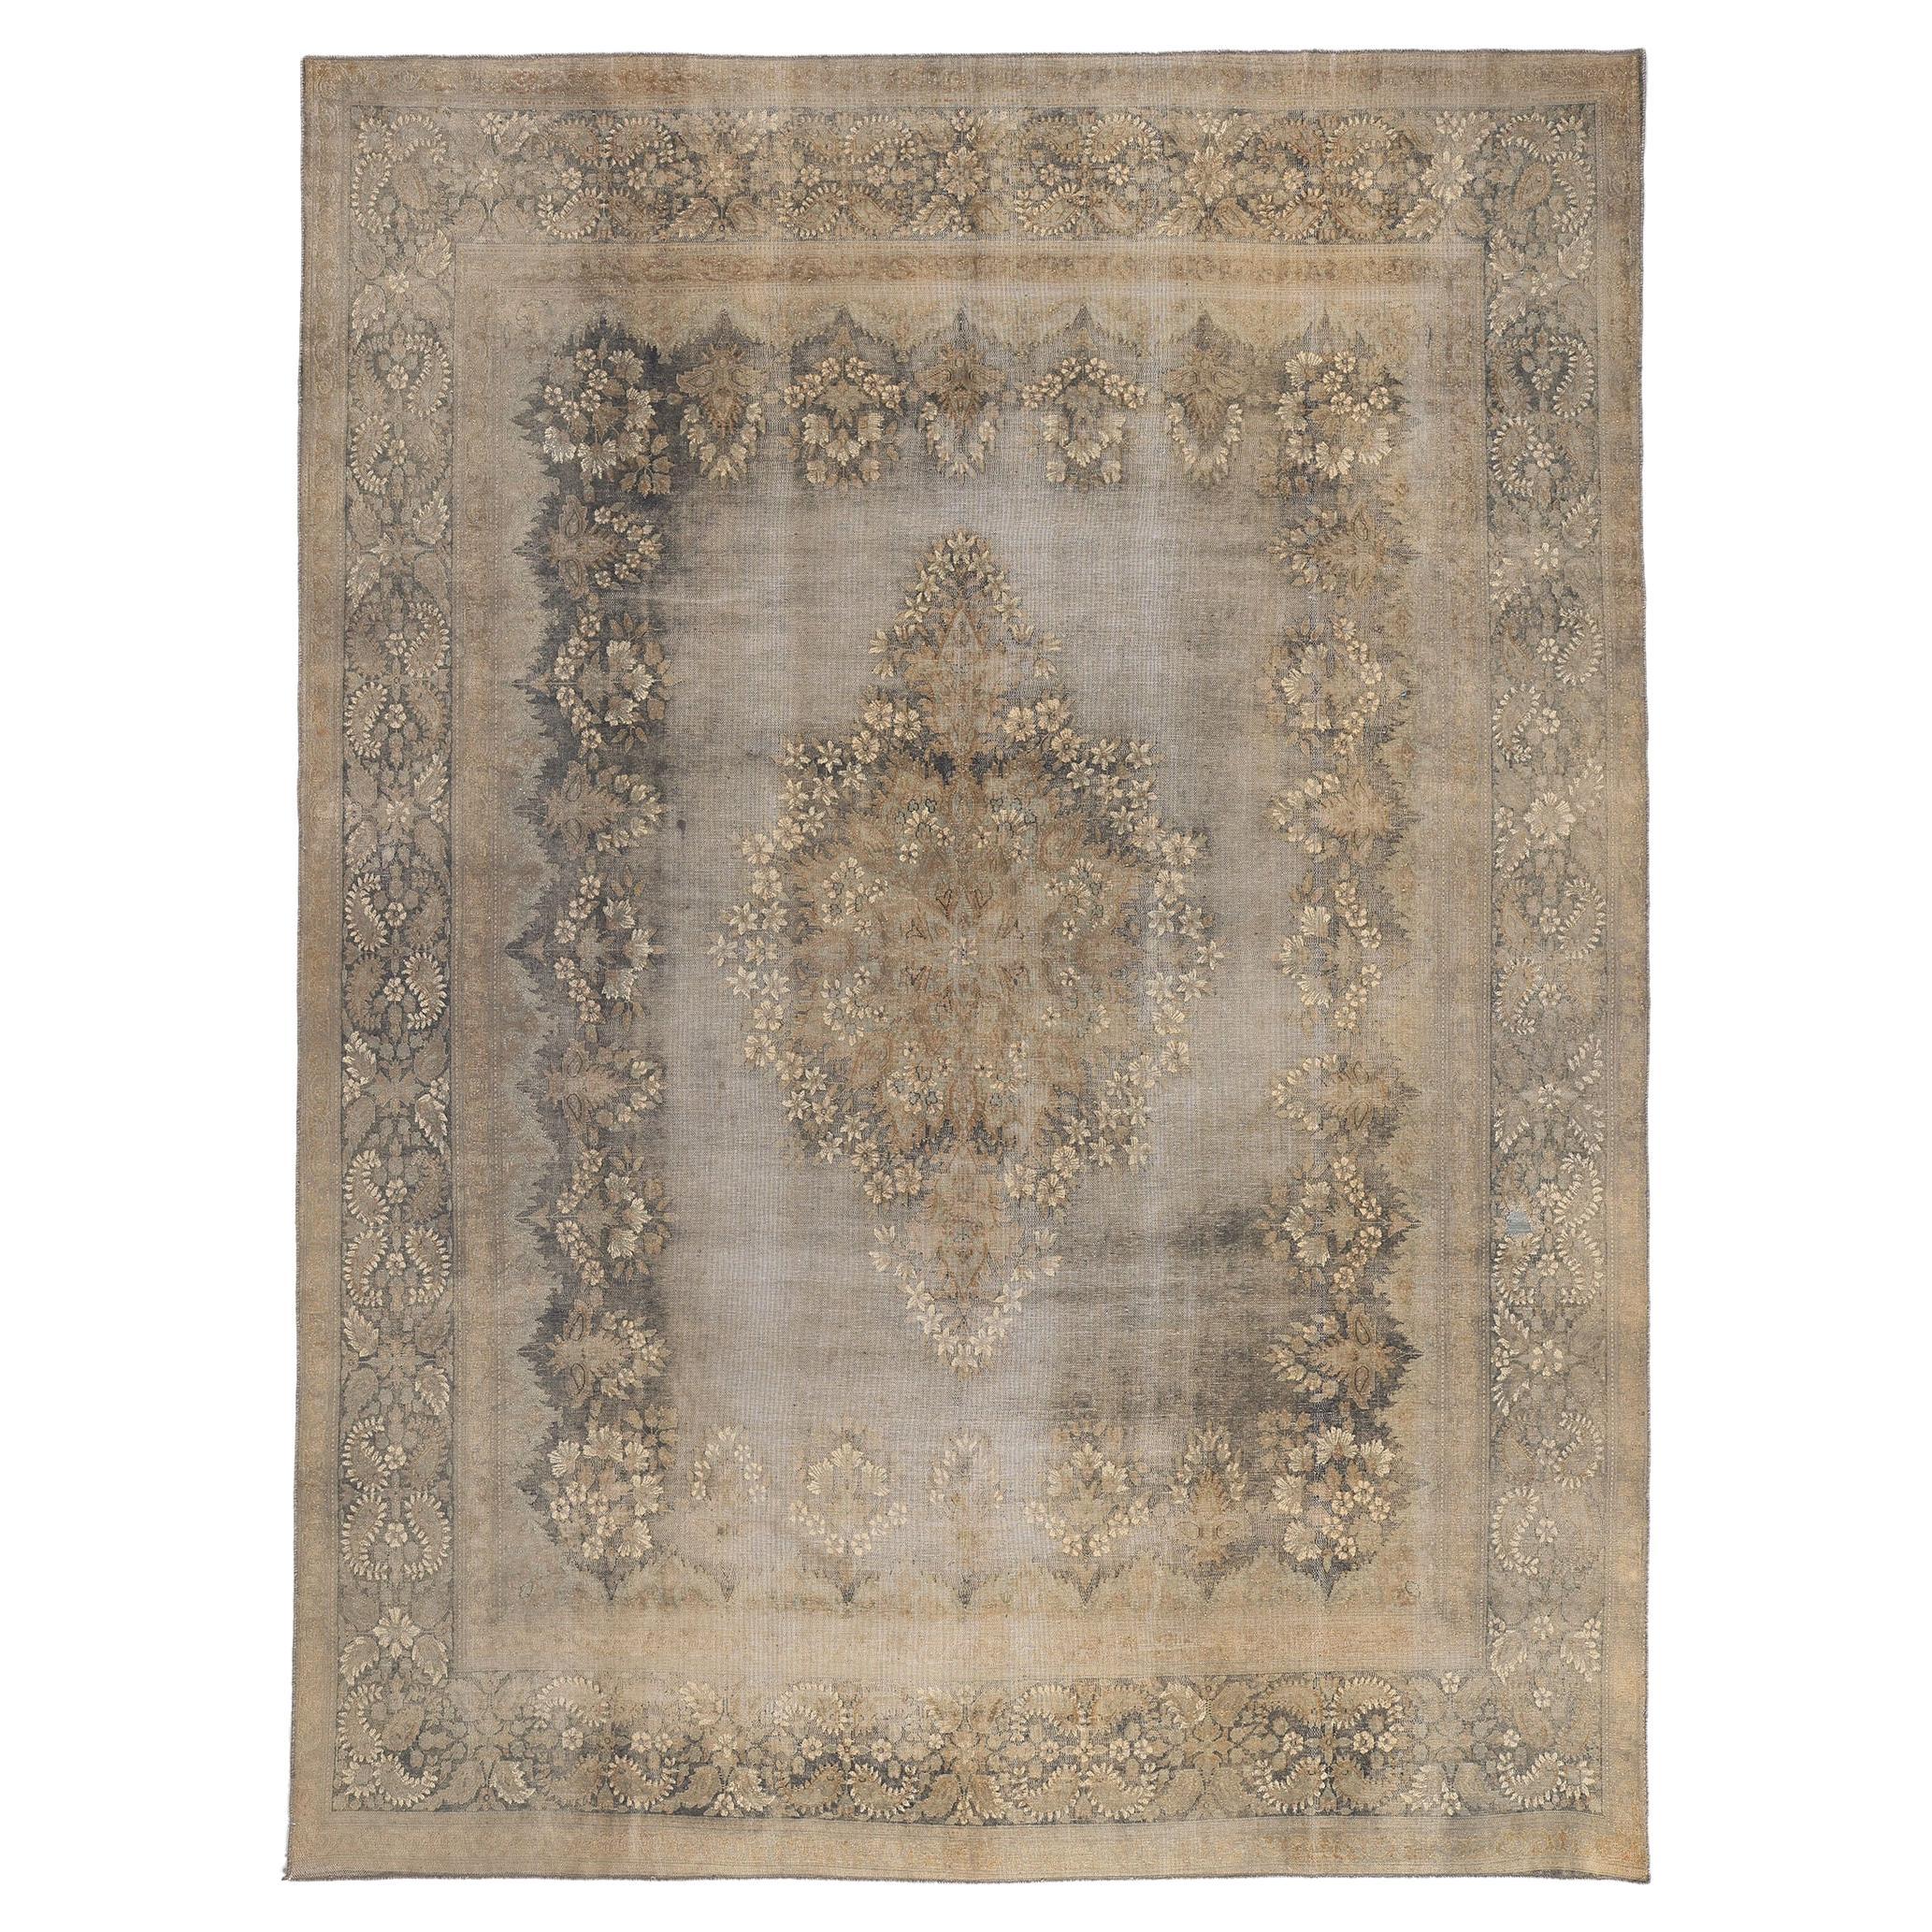 Vintage Turkish Overdyed Rug, American Colonial Revival Meets Modern Industrial For Sale